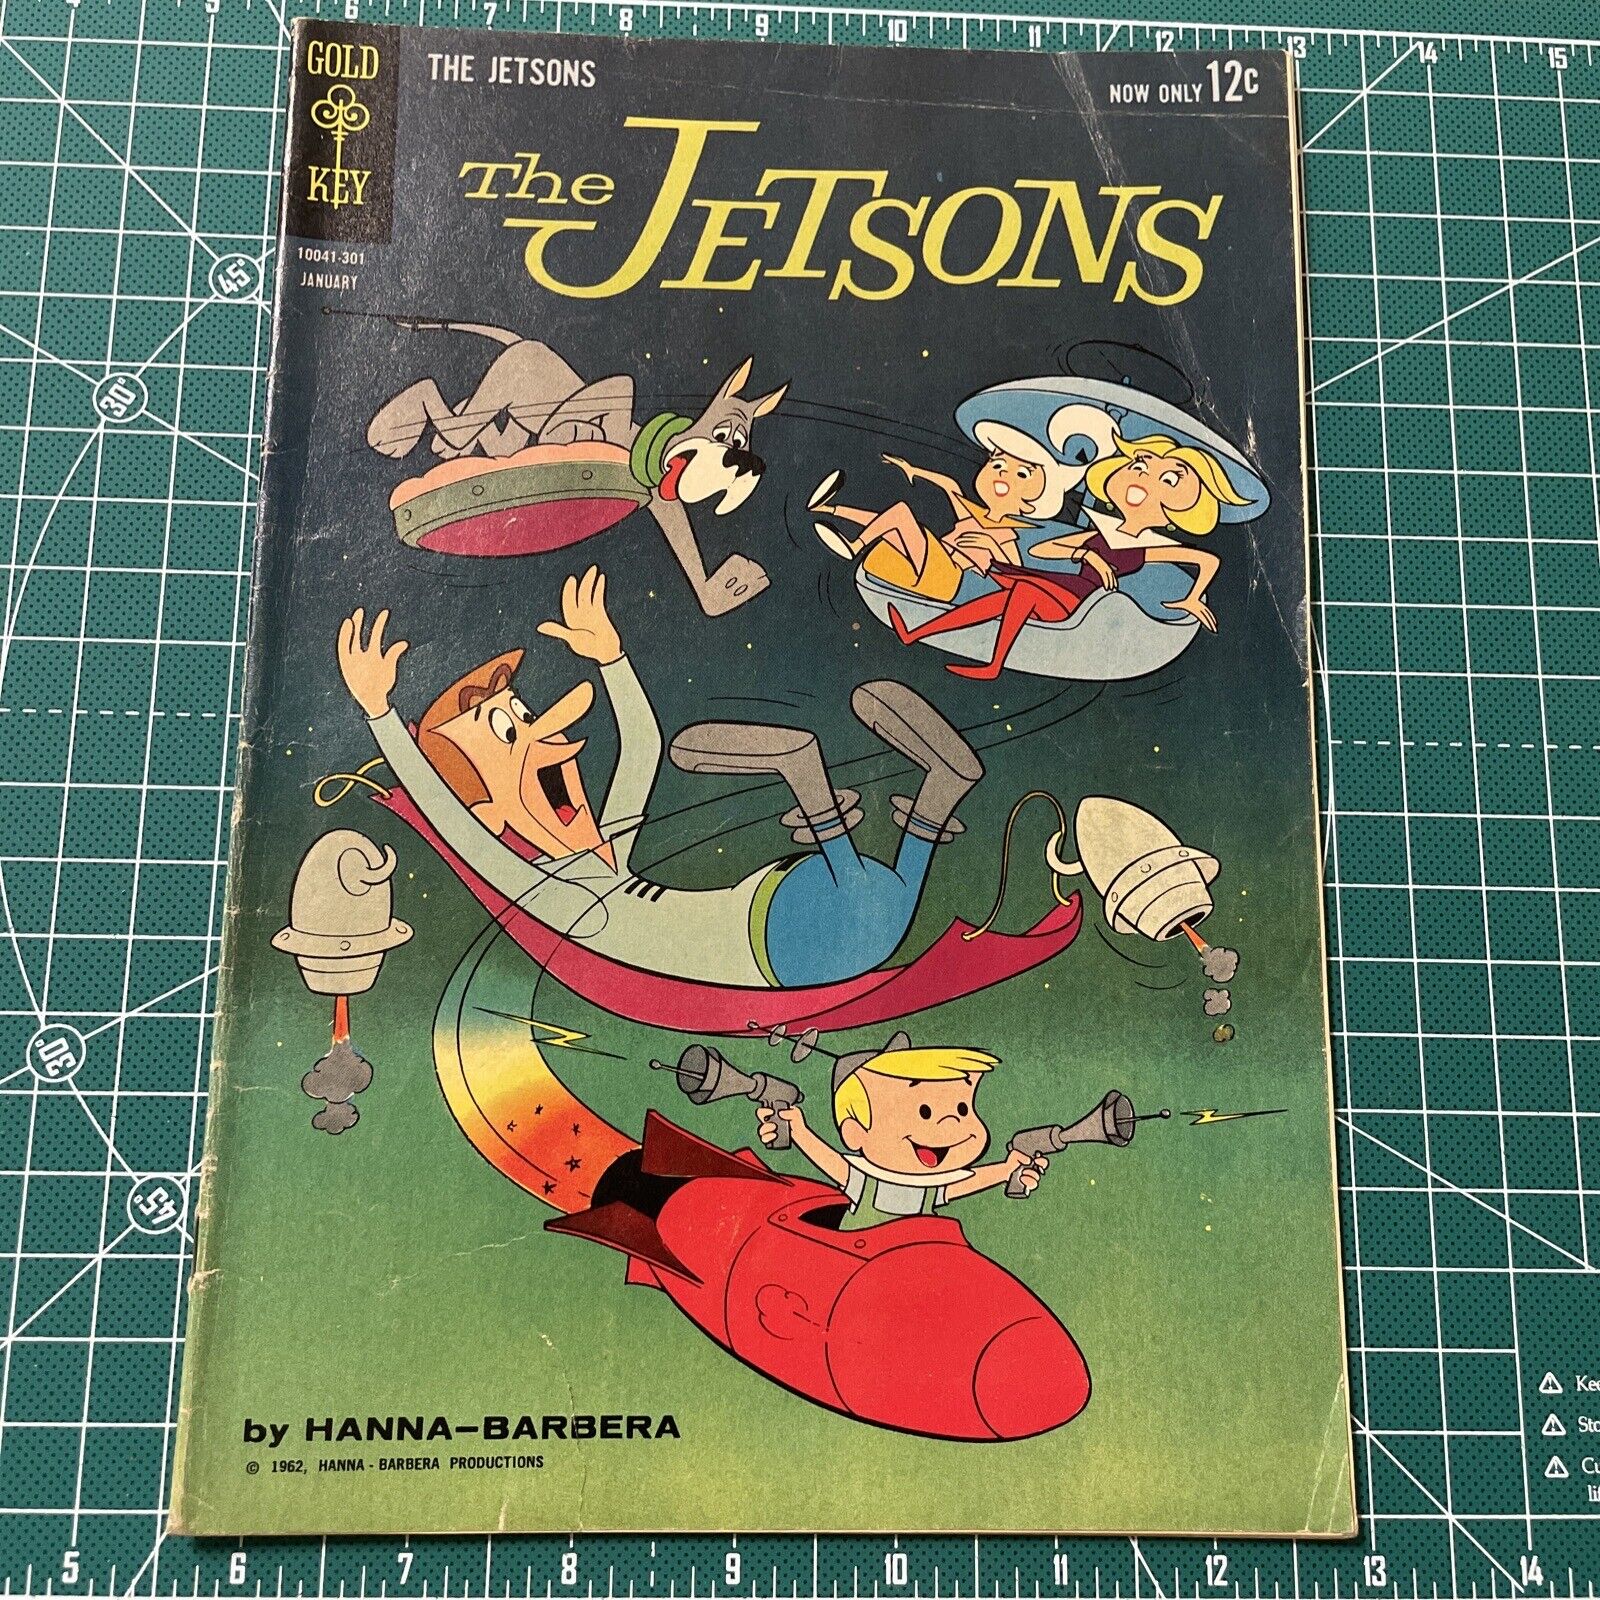 The Jetsons #1  Gold Key TV Comic 1963 1st appearance Key issue